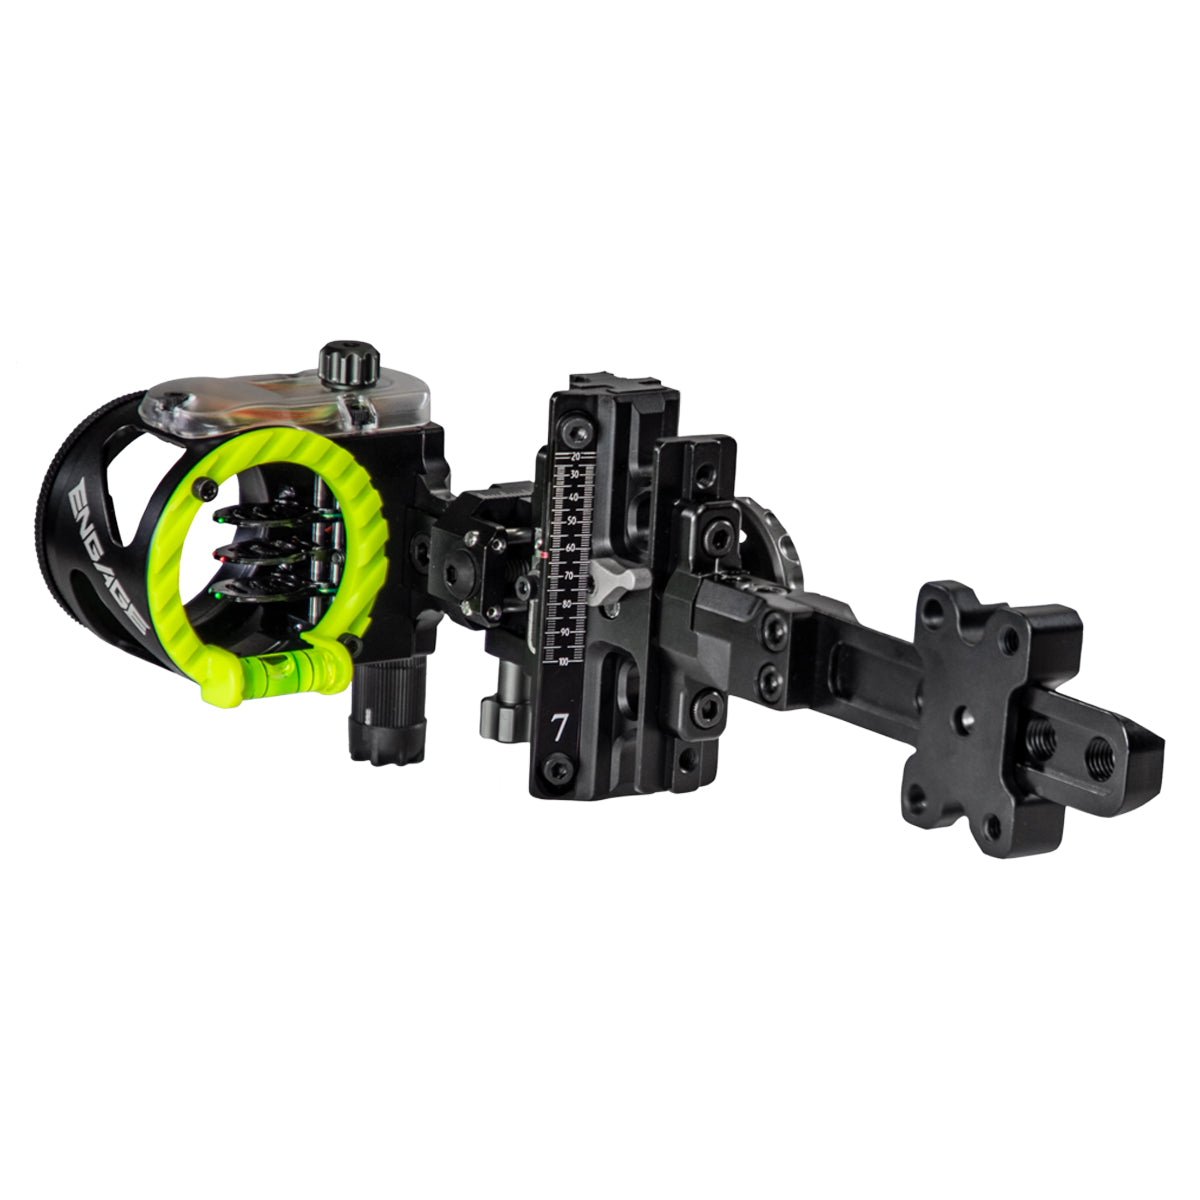 CBE Engage Hybrid 3 Pin Bow Sight in CBE Engage Hybrid 3 Pin Bow Sight by CBE | Archery - goHUNT Shop by GOHUNT | CBE - GOHUNT Shop